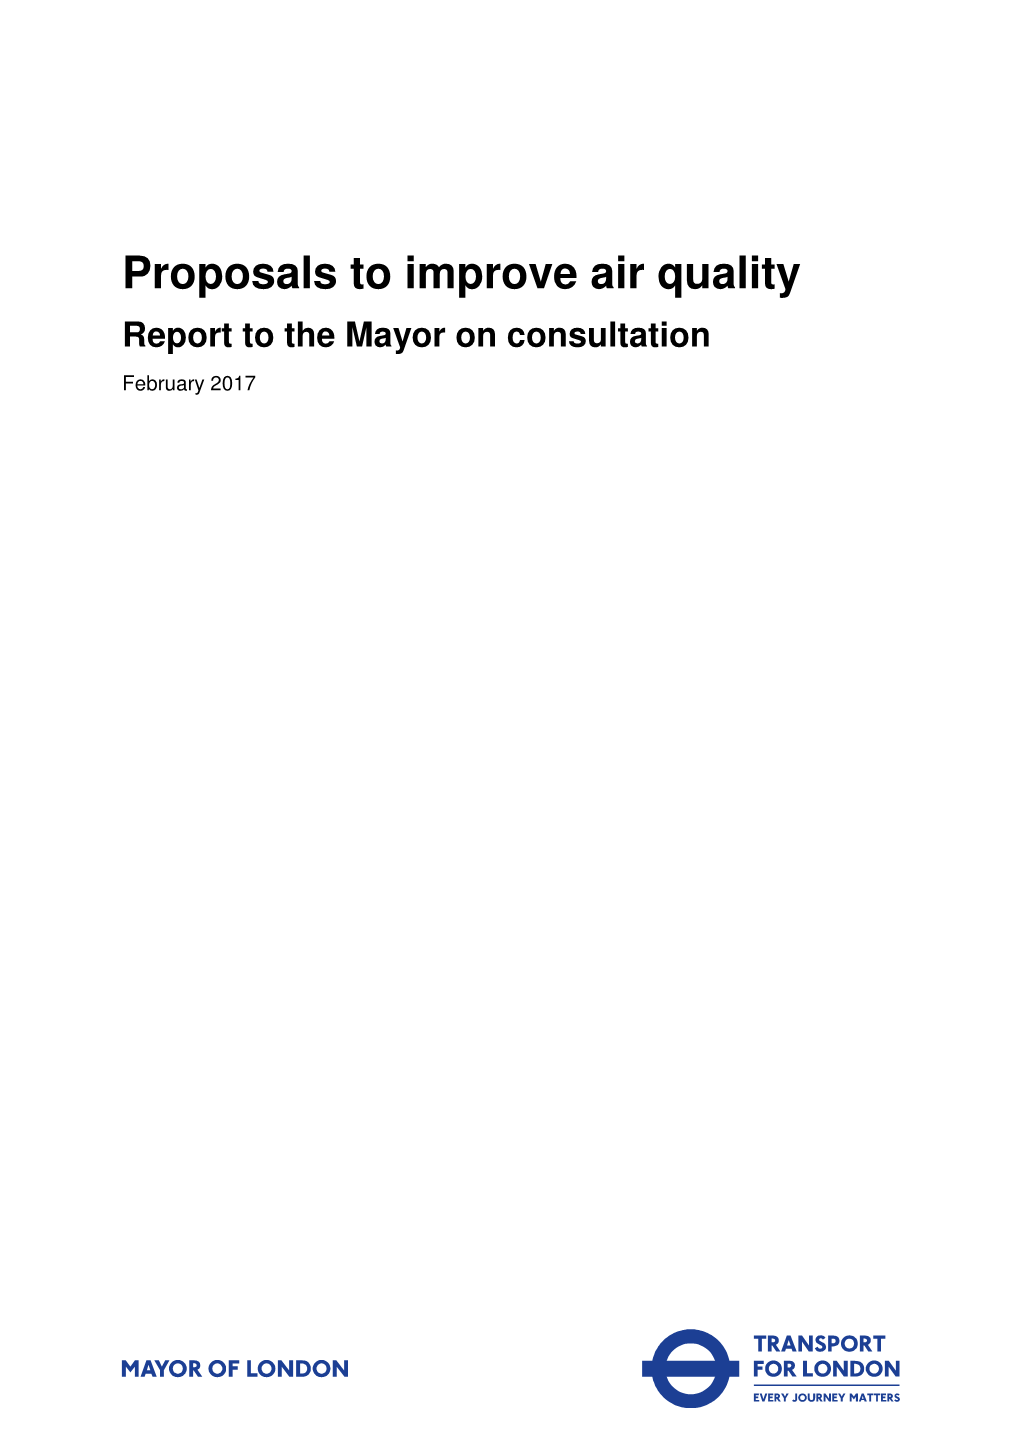 Proposals to Improve Air Quality Report to the Mayor on Consultation February 2017